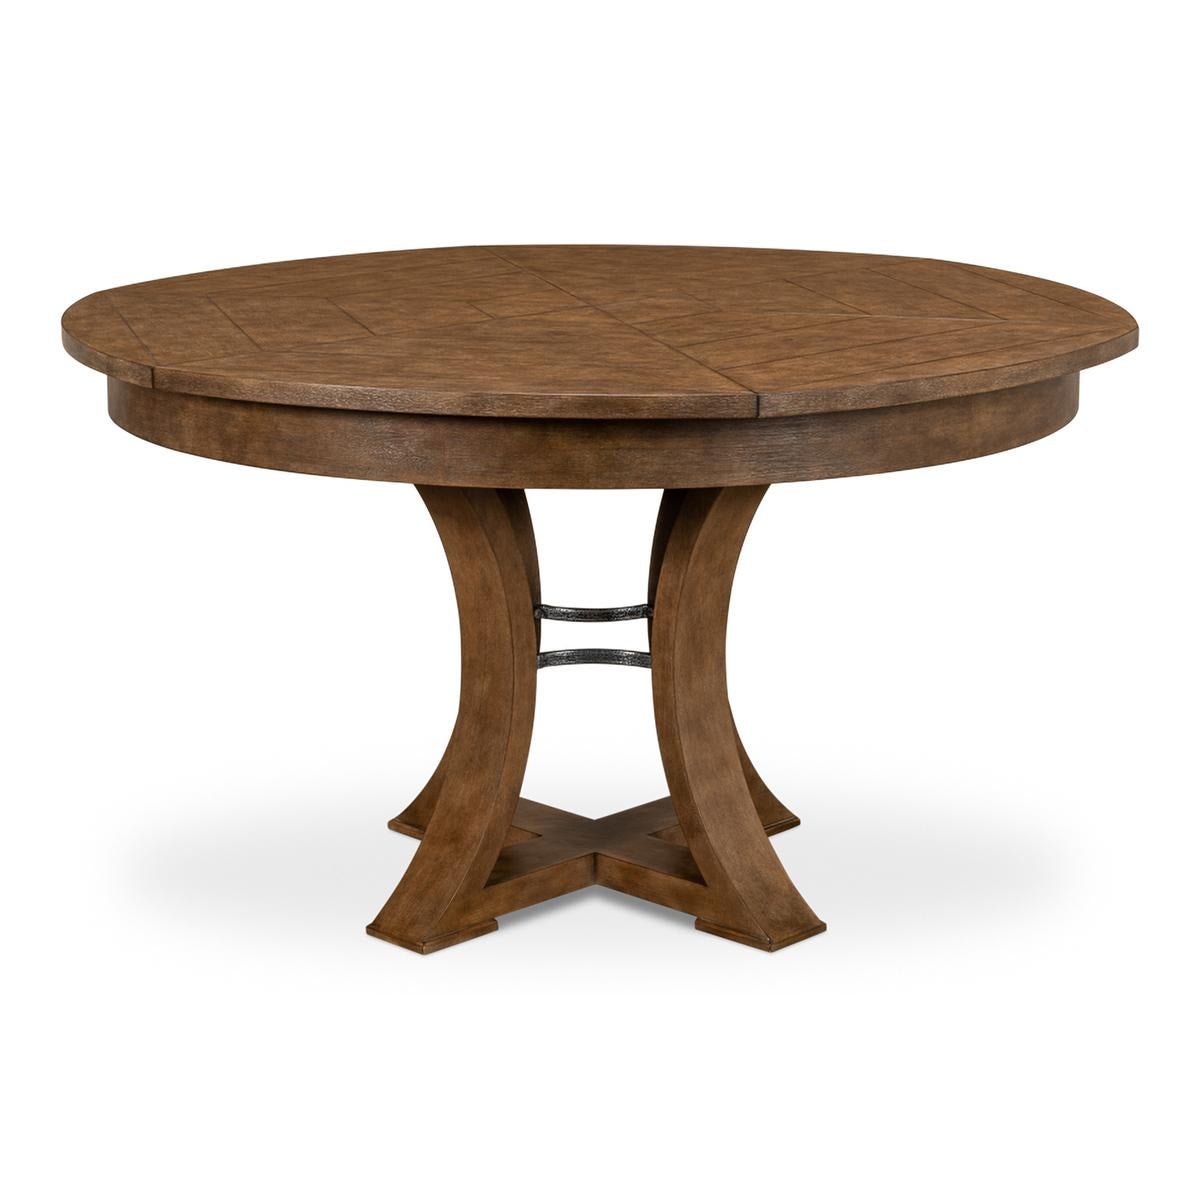 A modern transitional style round extending dining room table. Warm acacia wood top in our muted fossil finish with iron supports to the simple geometric form base. The table opens and extends to 70